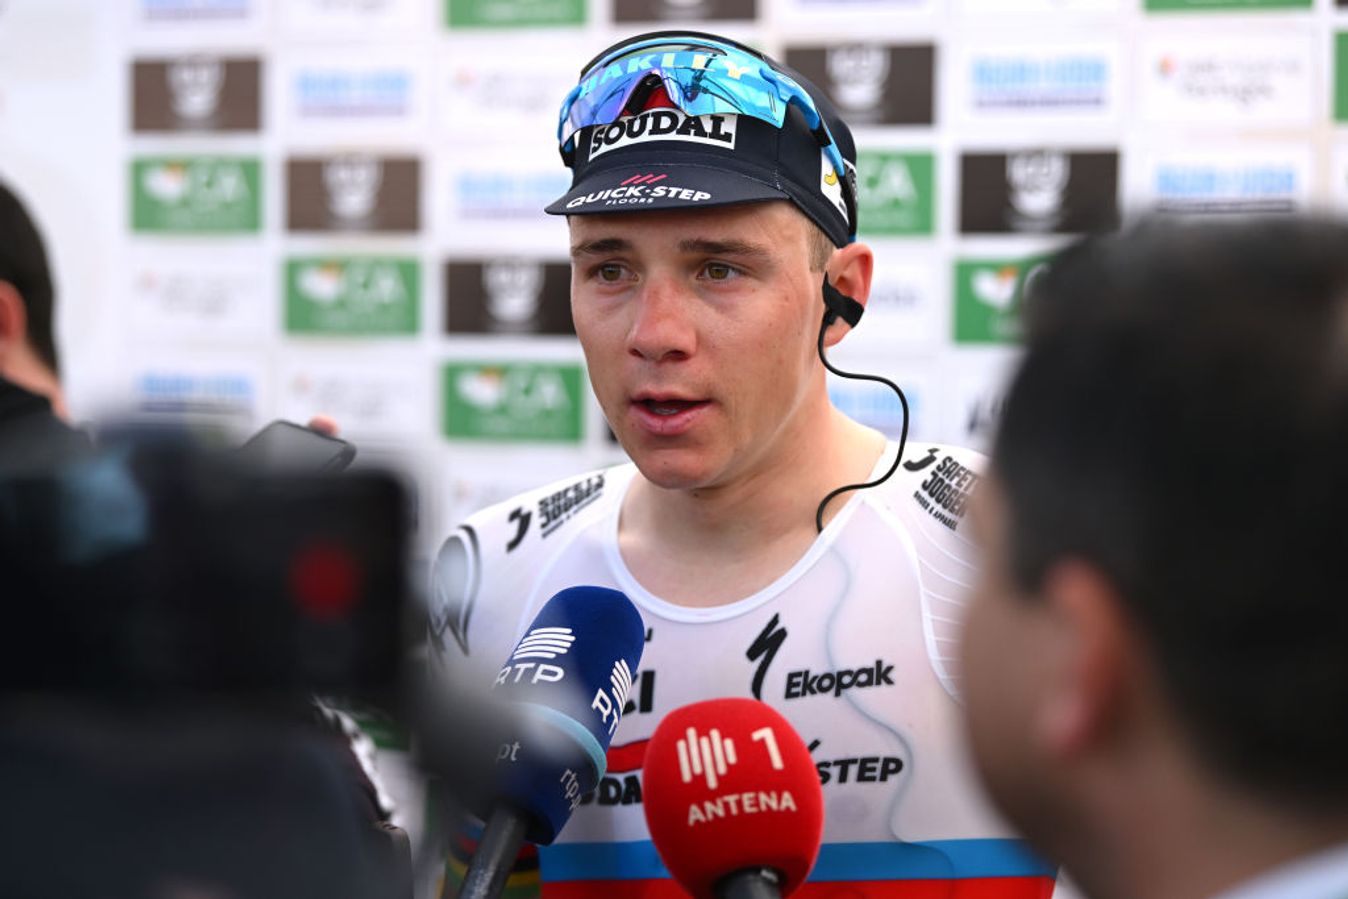 Evenepoel speaks to the media after his win